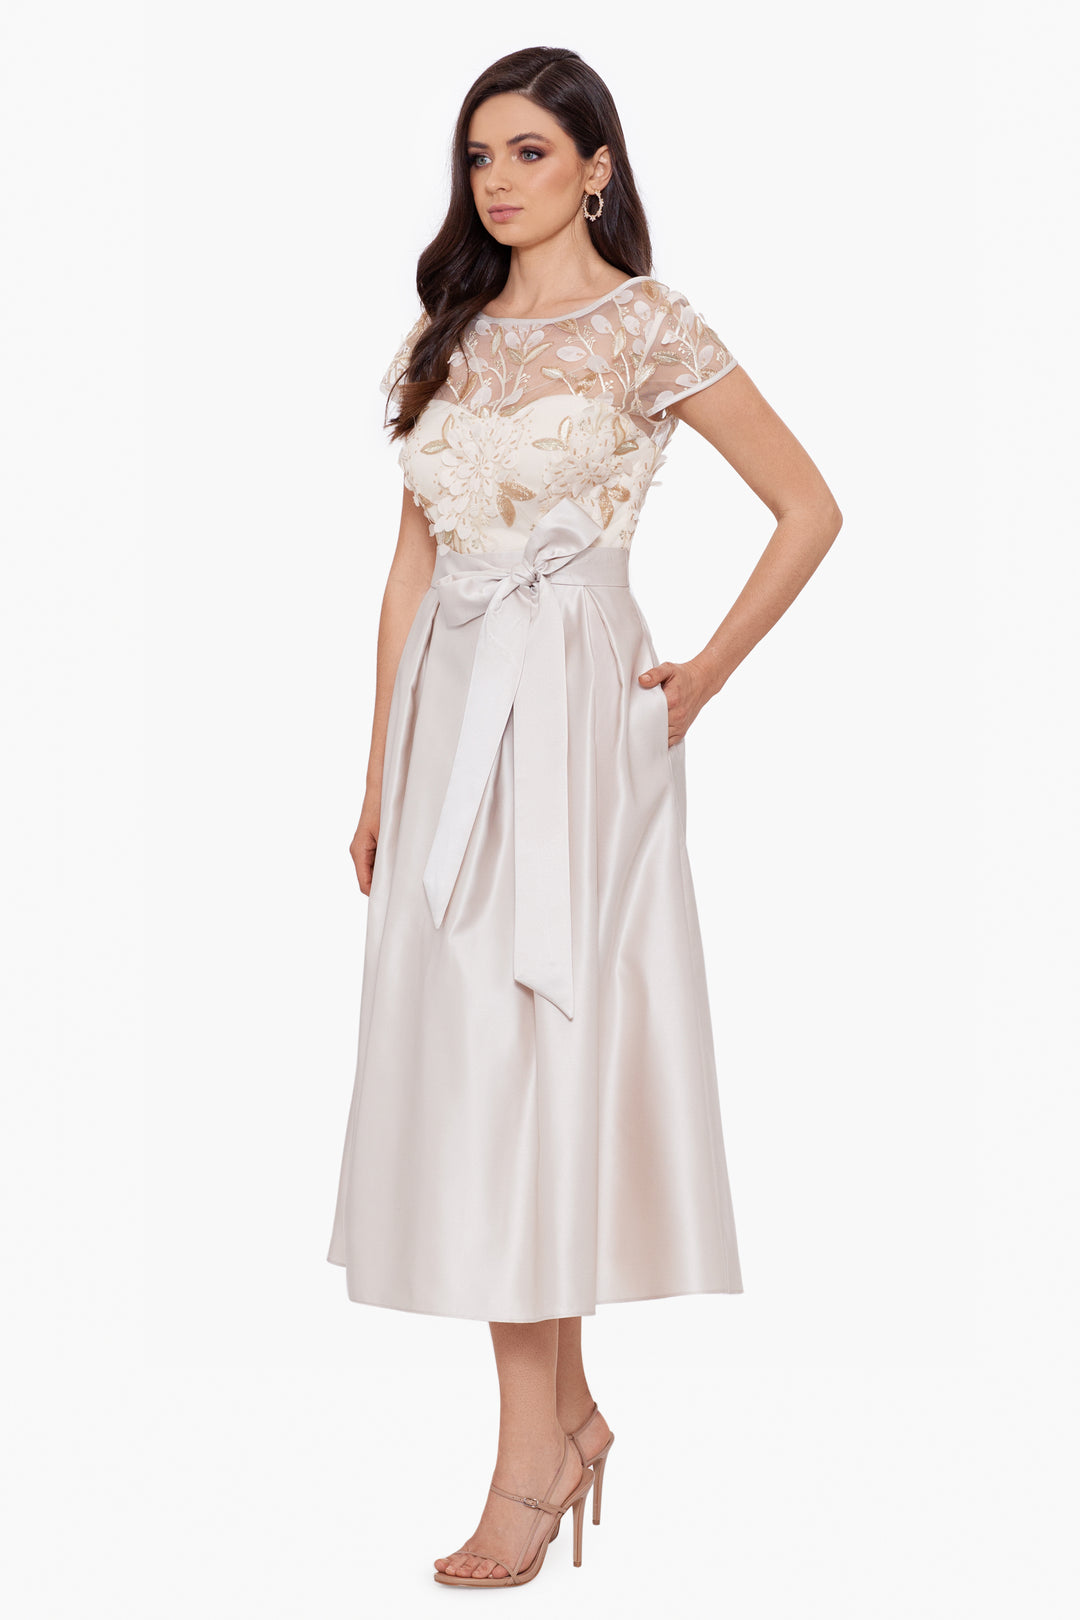 "Paige" Long Embroidery Overlay Satin Skirt Dress